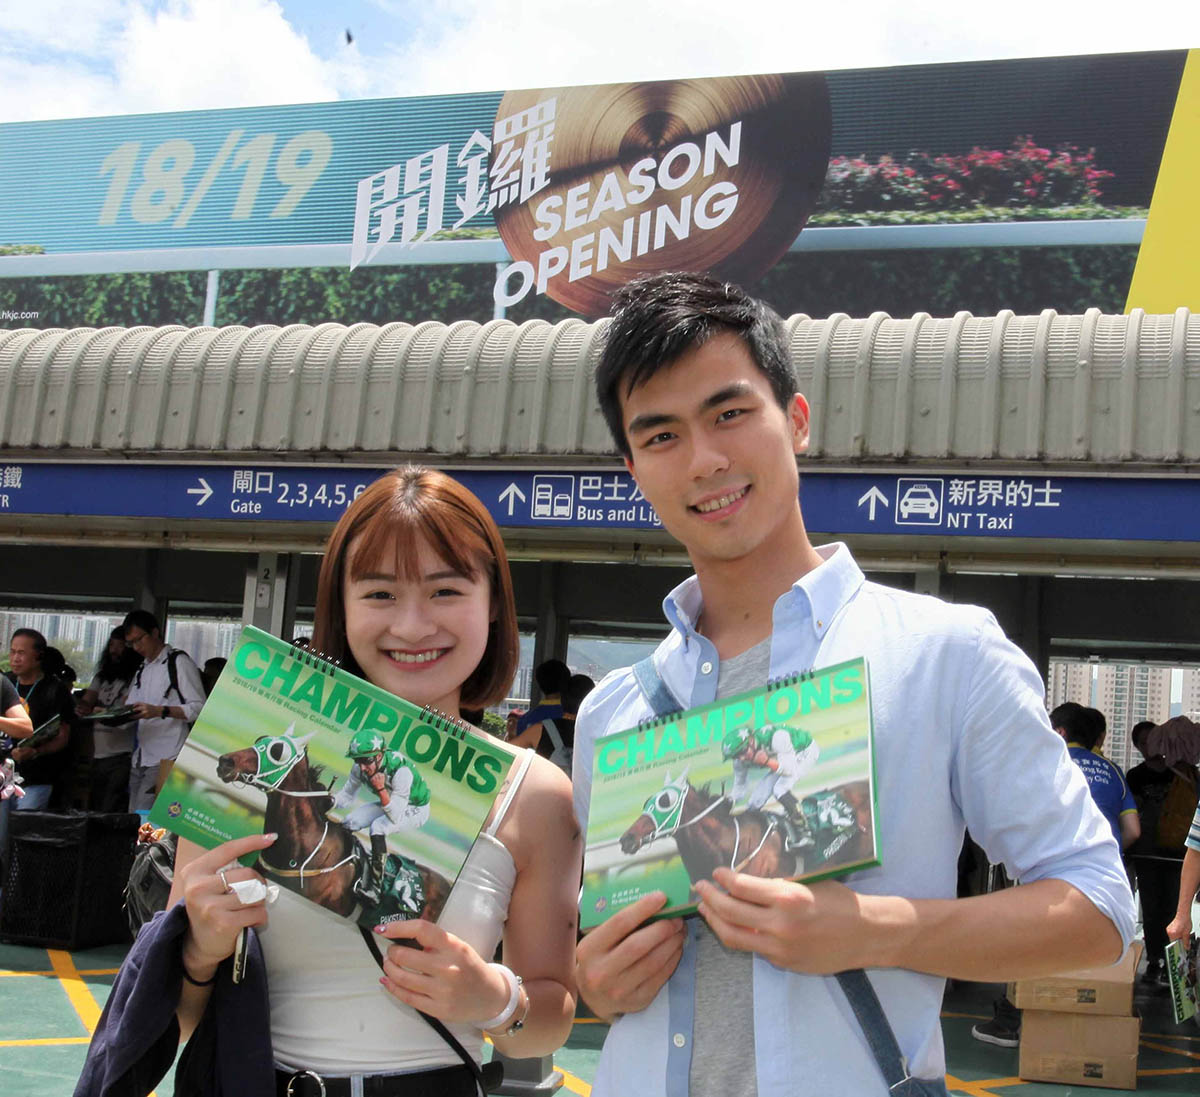 Fans arriving at the Season Opening receive a complimentary 2018/19 Racing Calendar to usher in the new season.